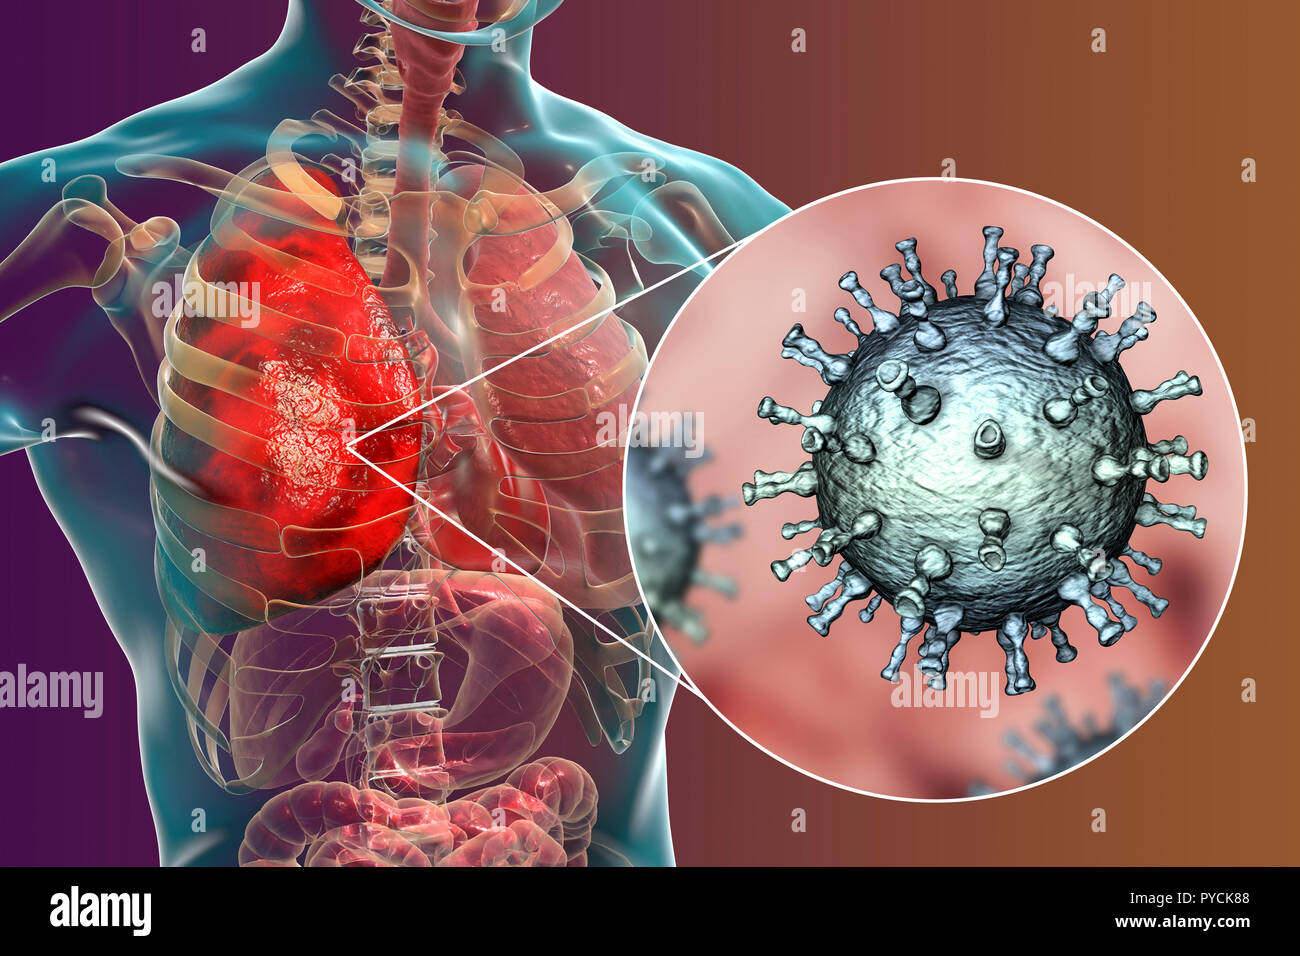 Pneumonia caused by varicella zoster virus (VZV), computer illustration. VZV is a virus from the Herpesviridae family, the causative agent of chickenpox and shingles. In severe cases VZV may cause complications, such as pneumonia and encephalitis. Stock Photo